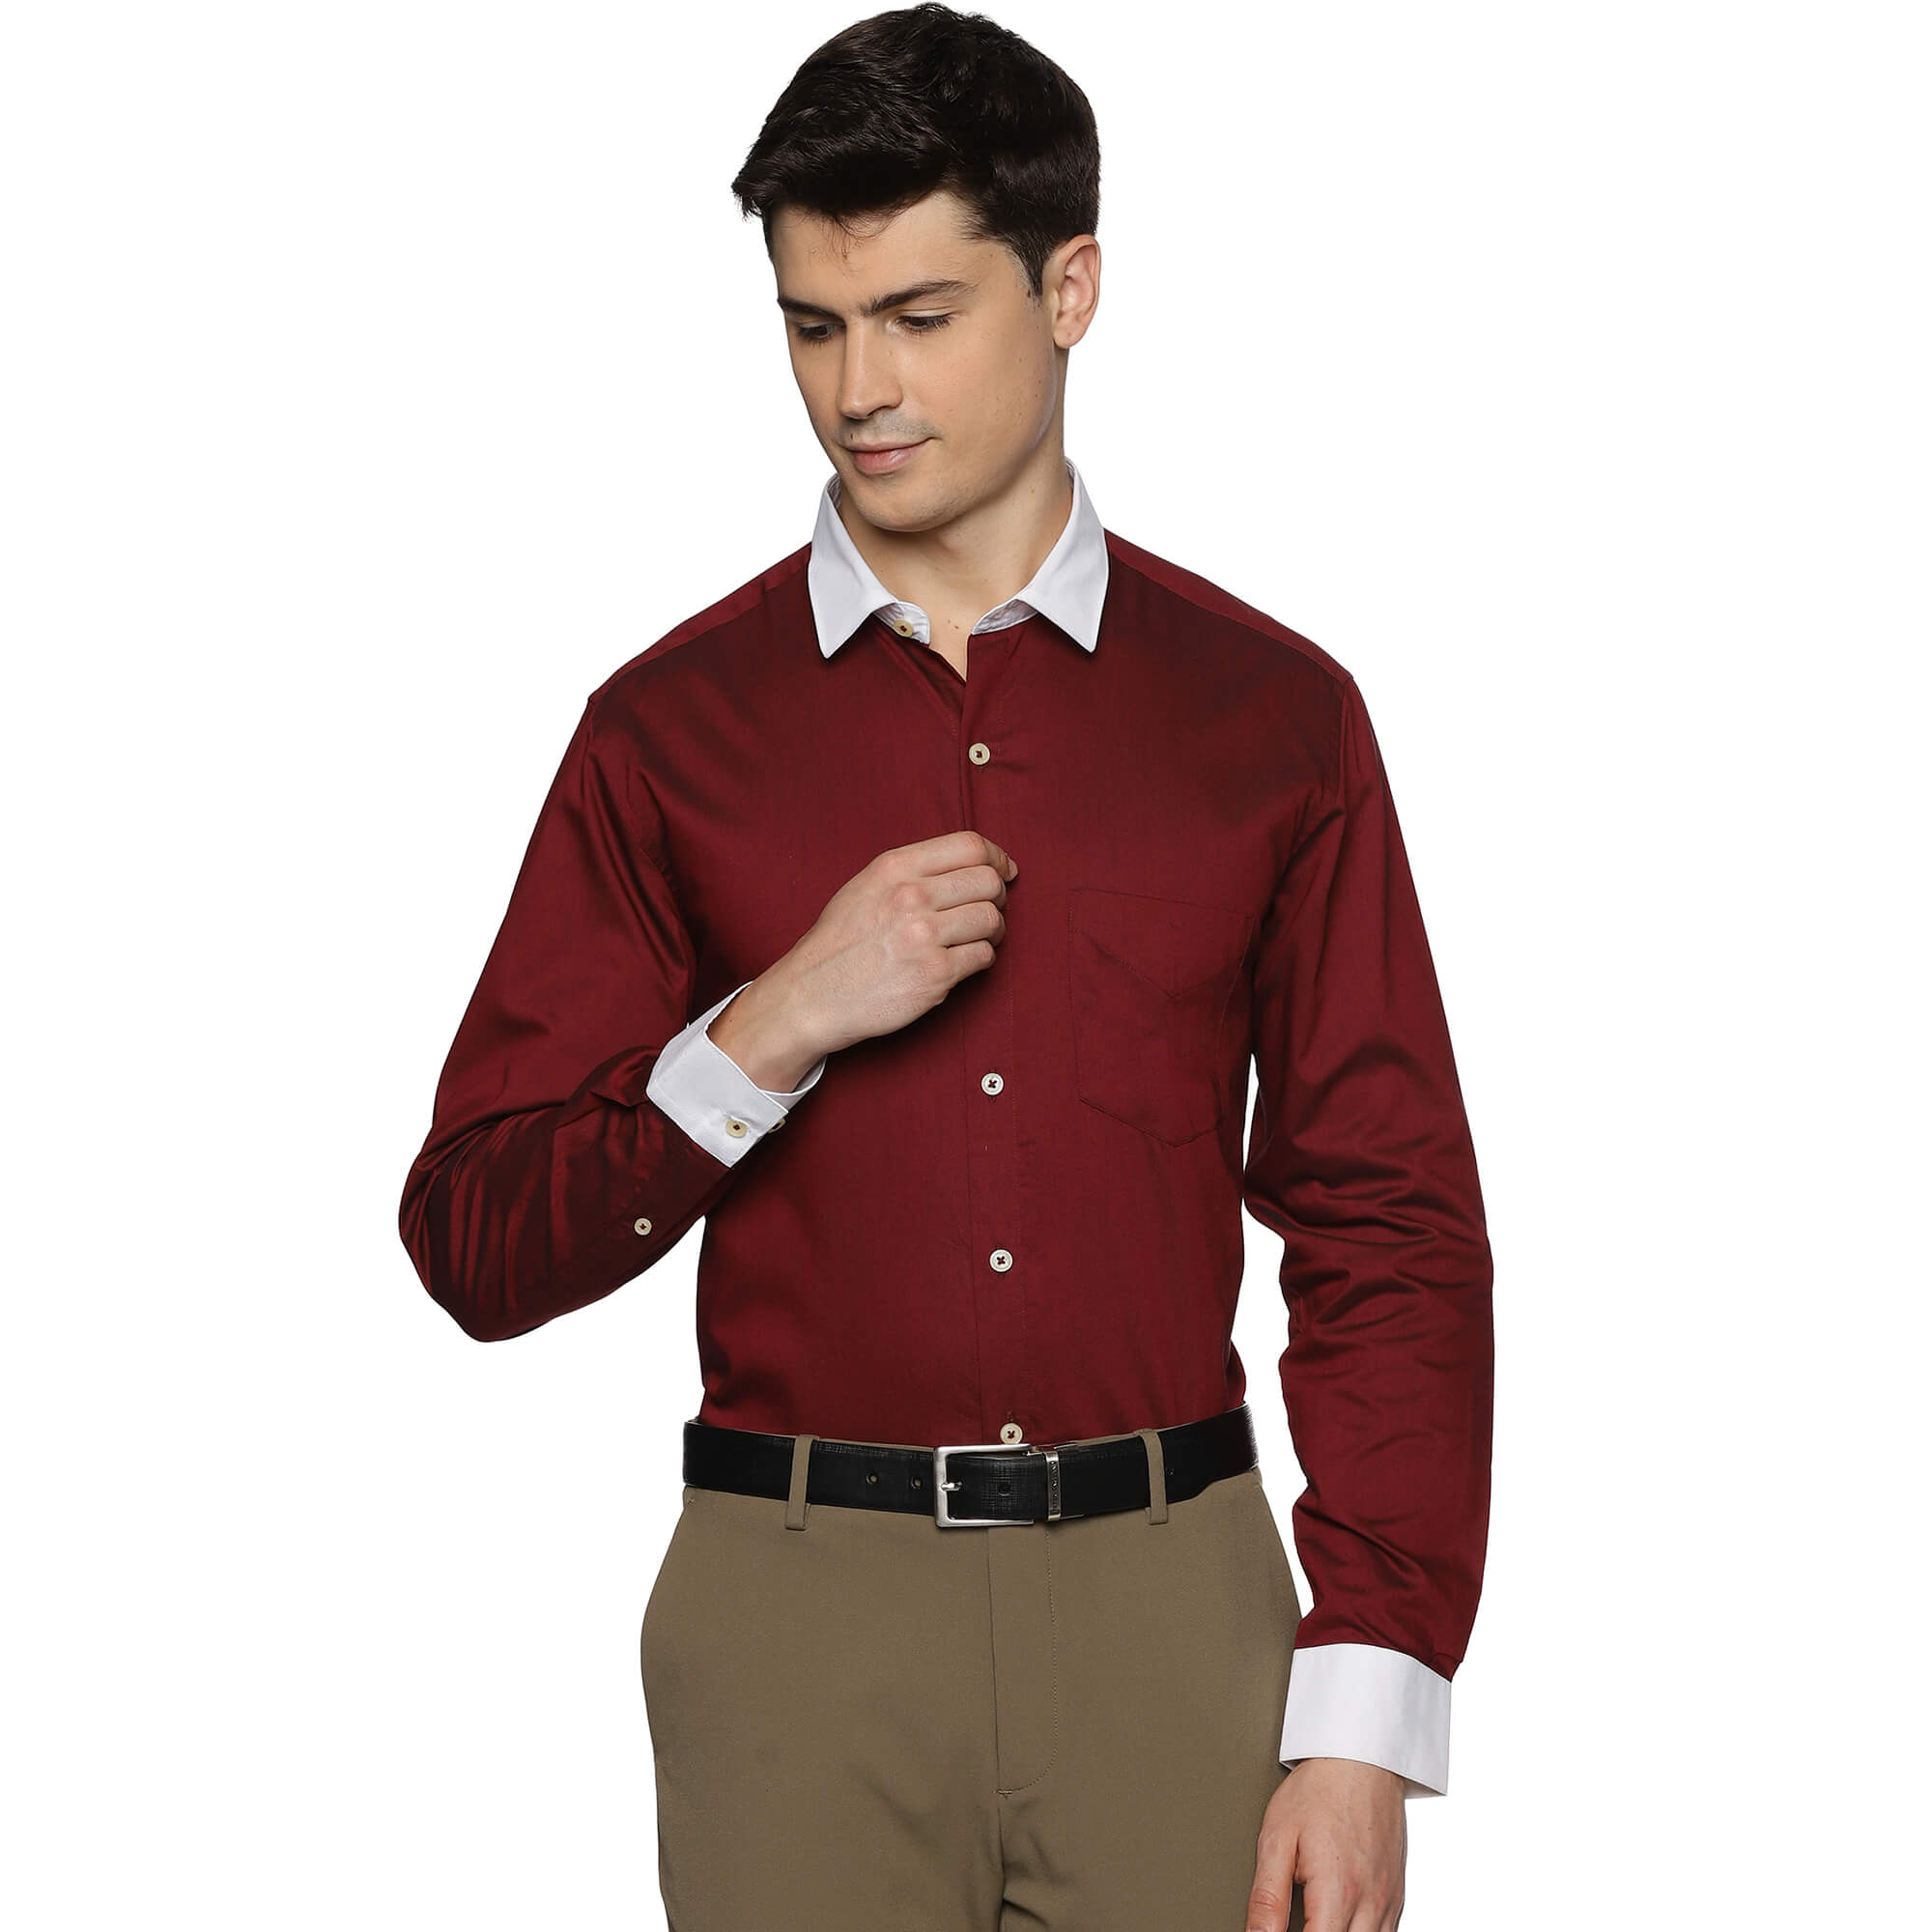 White Collar Solid Shirt In Wine - The Formal Club